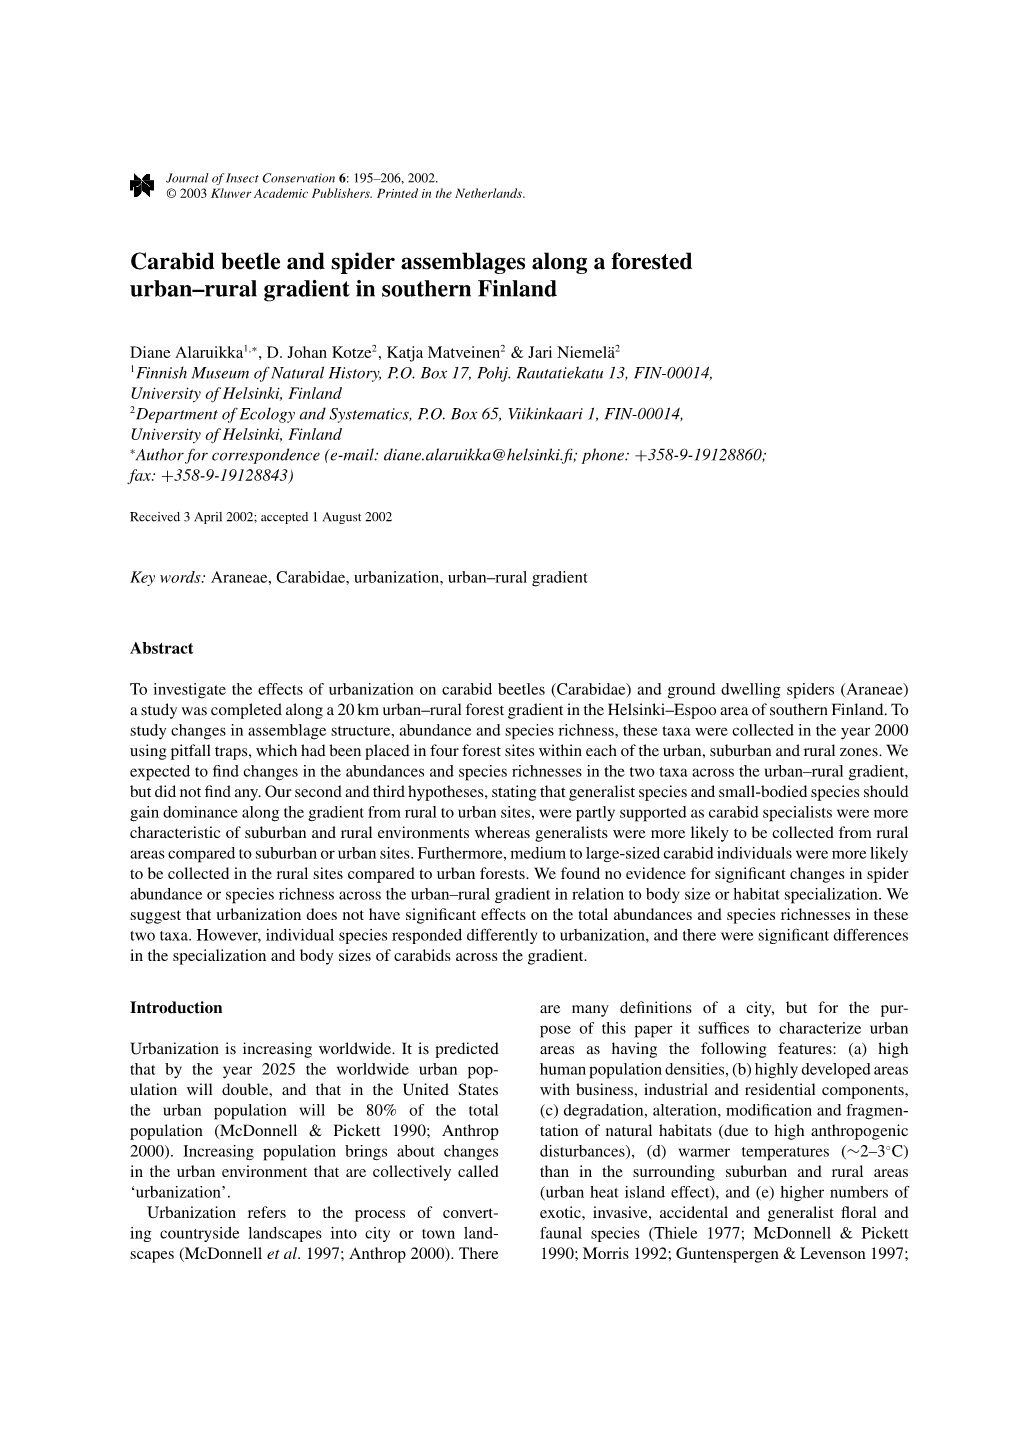 Carabid Beetle and Spider Assemblages Along a Forested Urban–Rural Gradient in Southern Finland